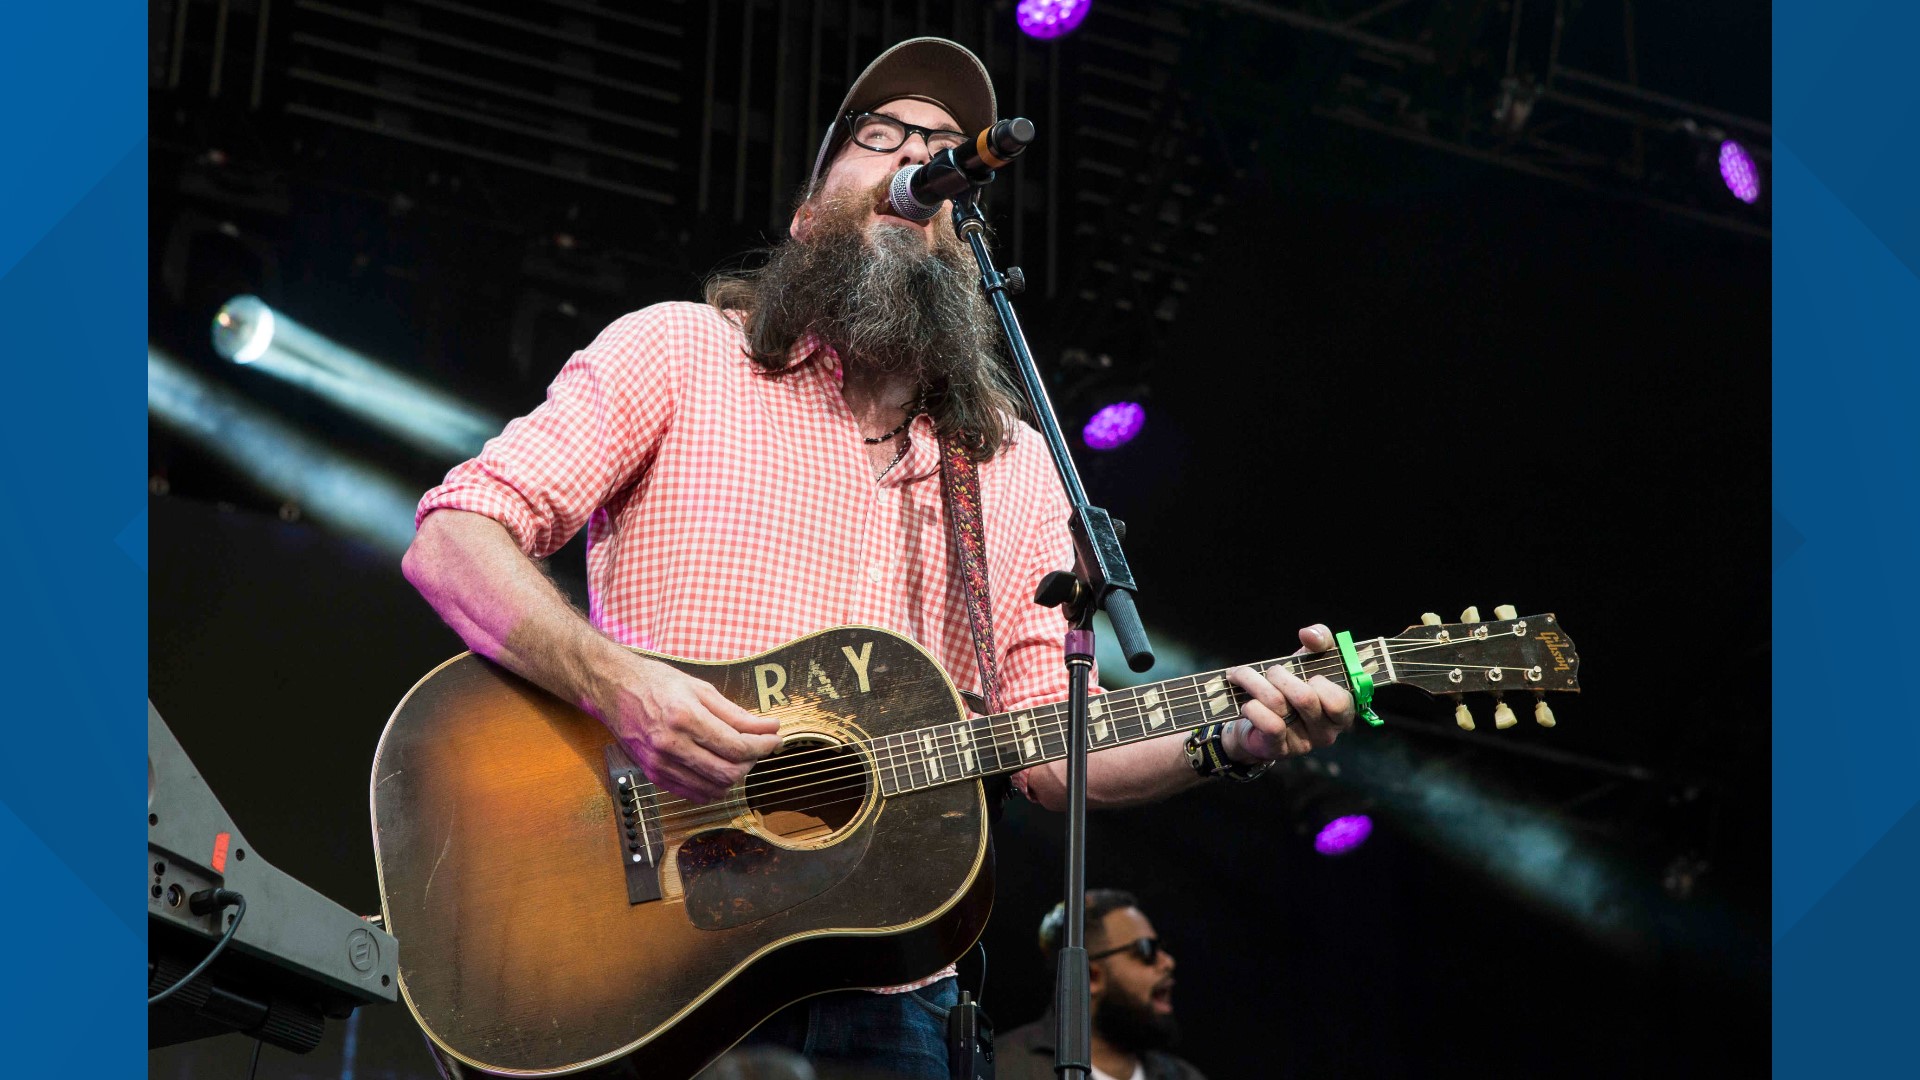 13News reporter Rich Nye spoke with contemporary Christian artist Crowder in a Zoom interview.